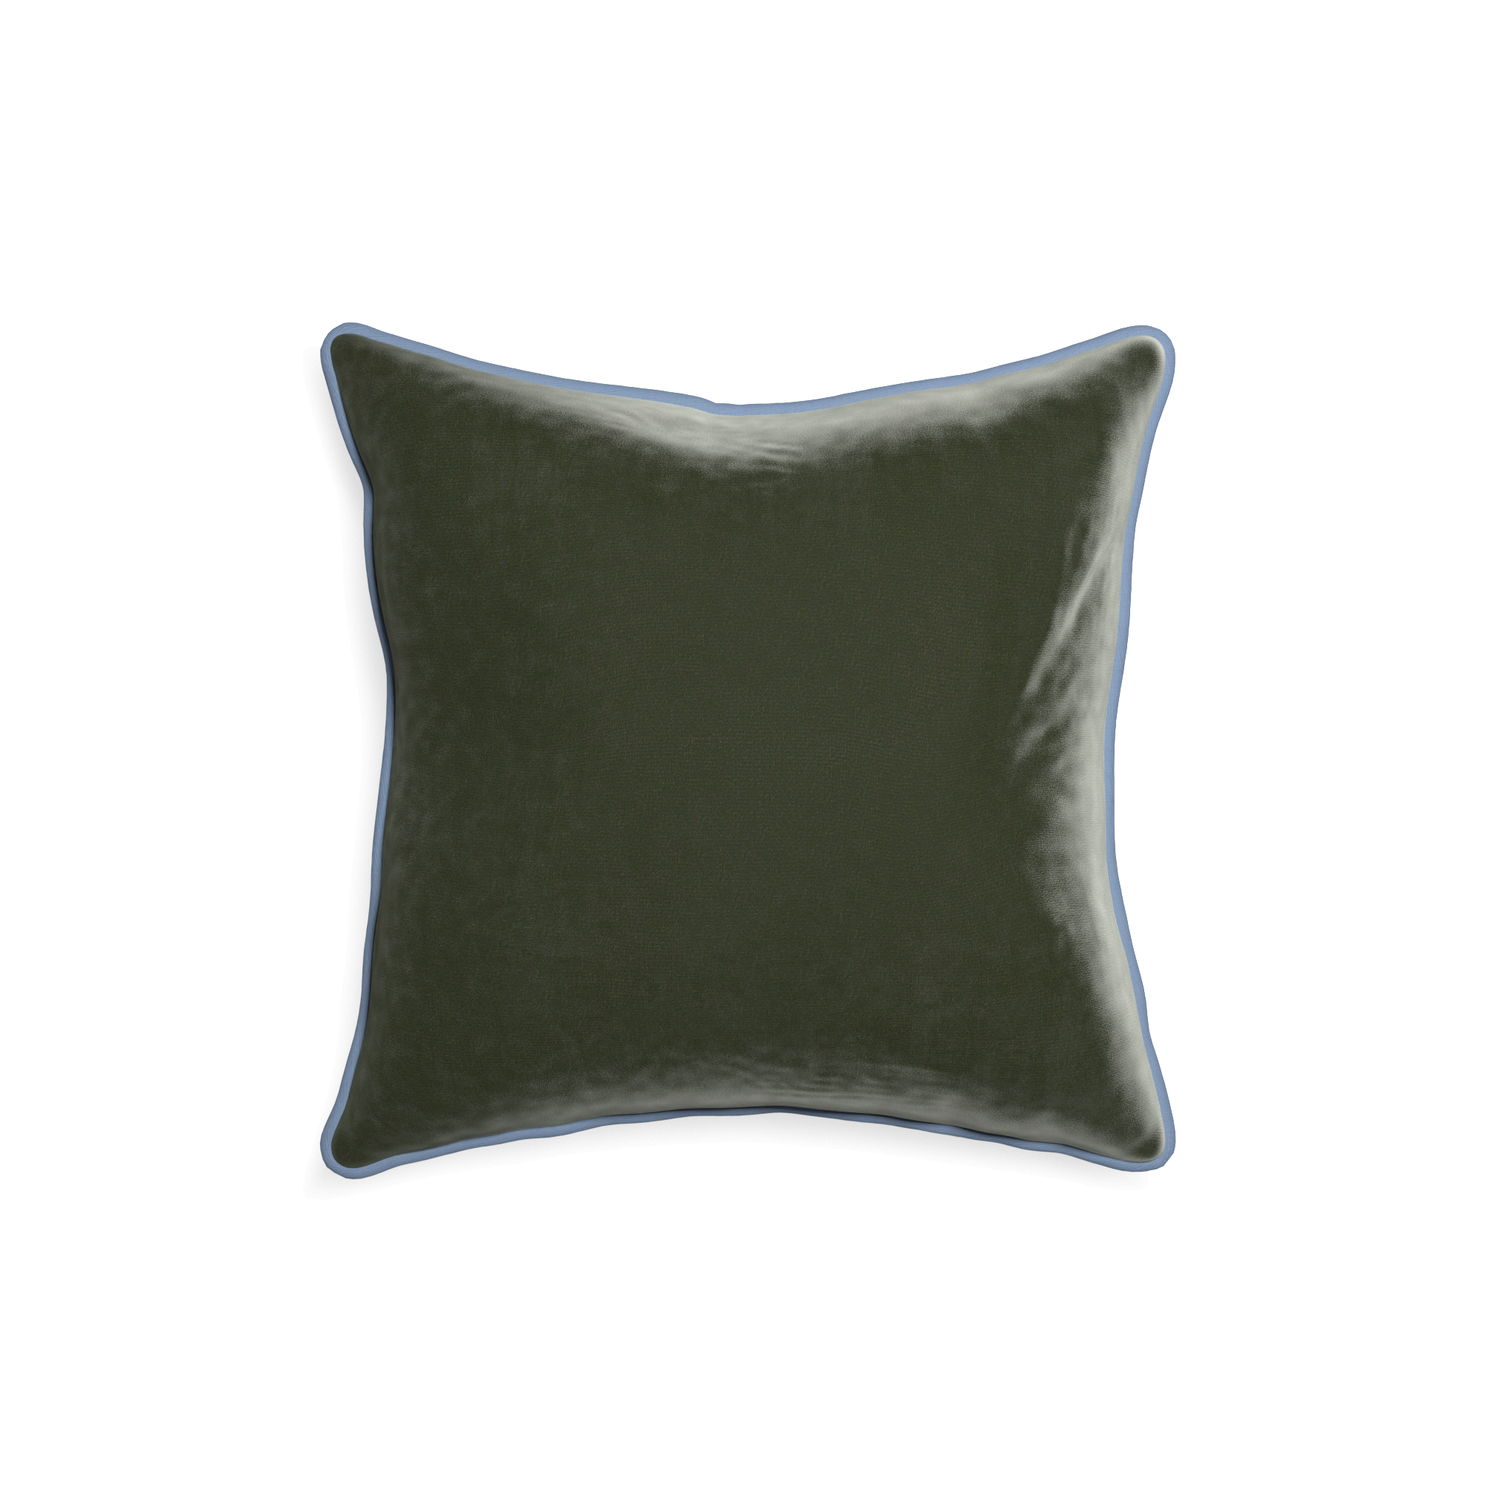 square fern green velvet pillow with sky blue piping